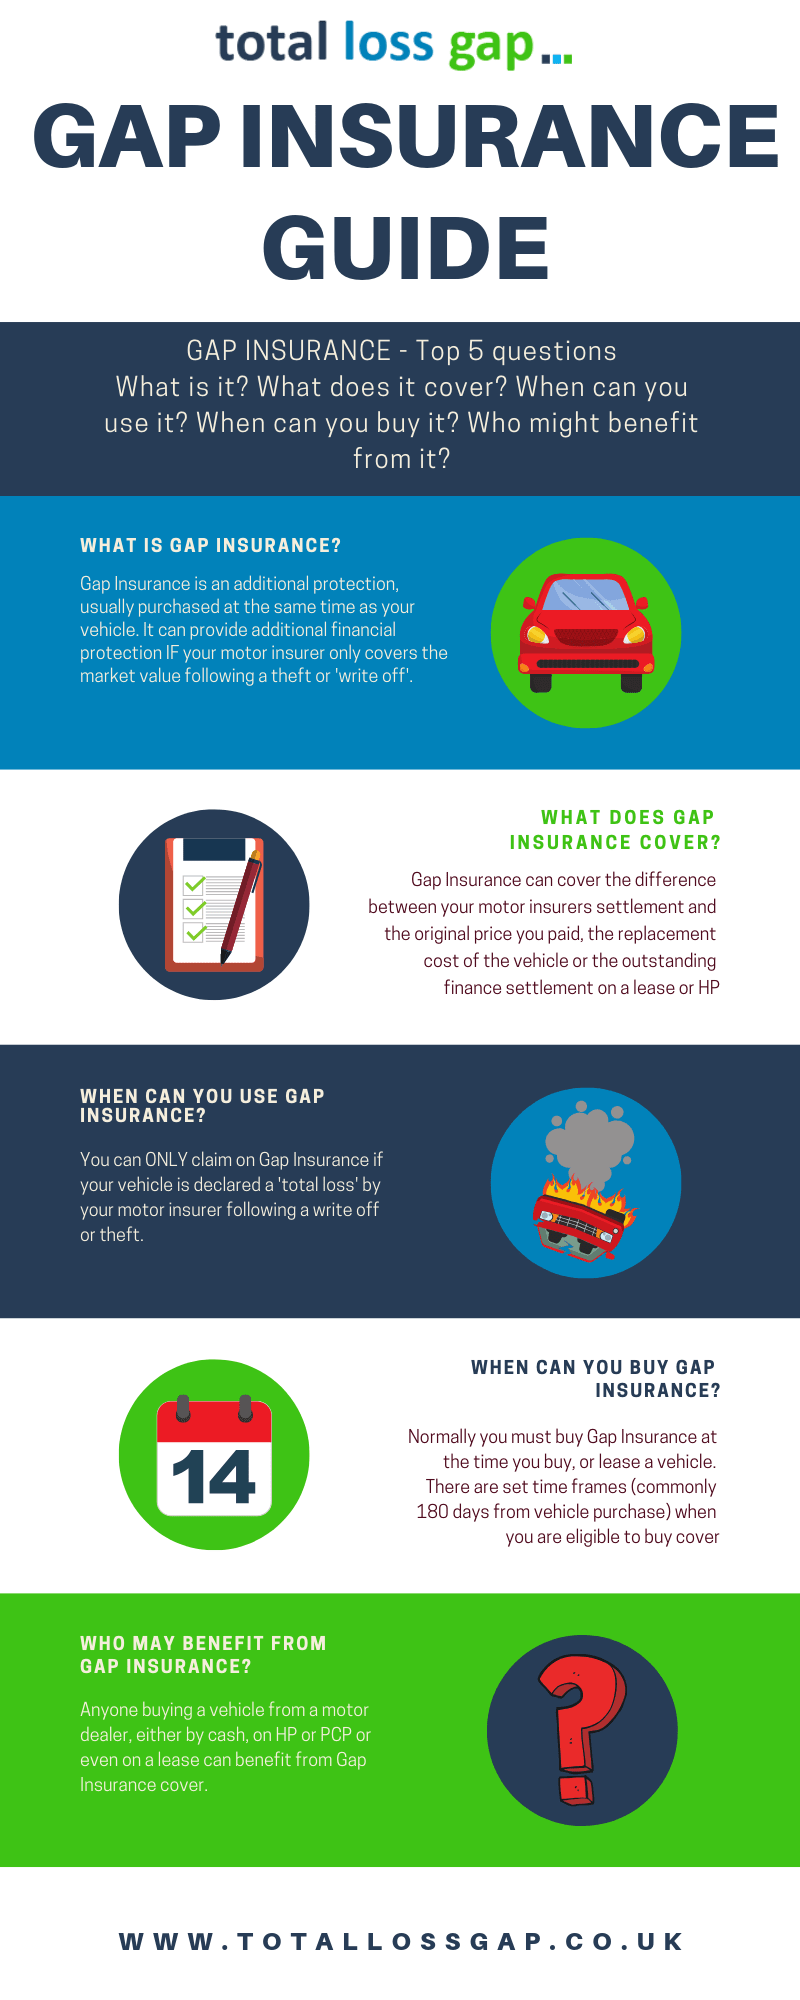 GAP Insurance - Explained in a Complete Guide | TotalLossGap